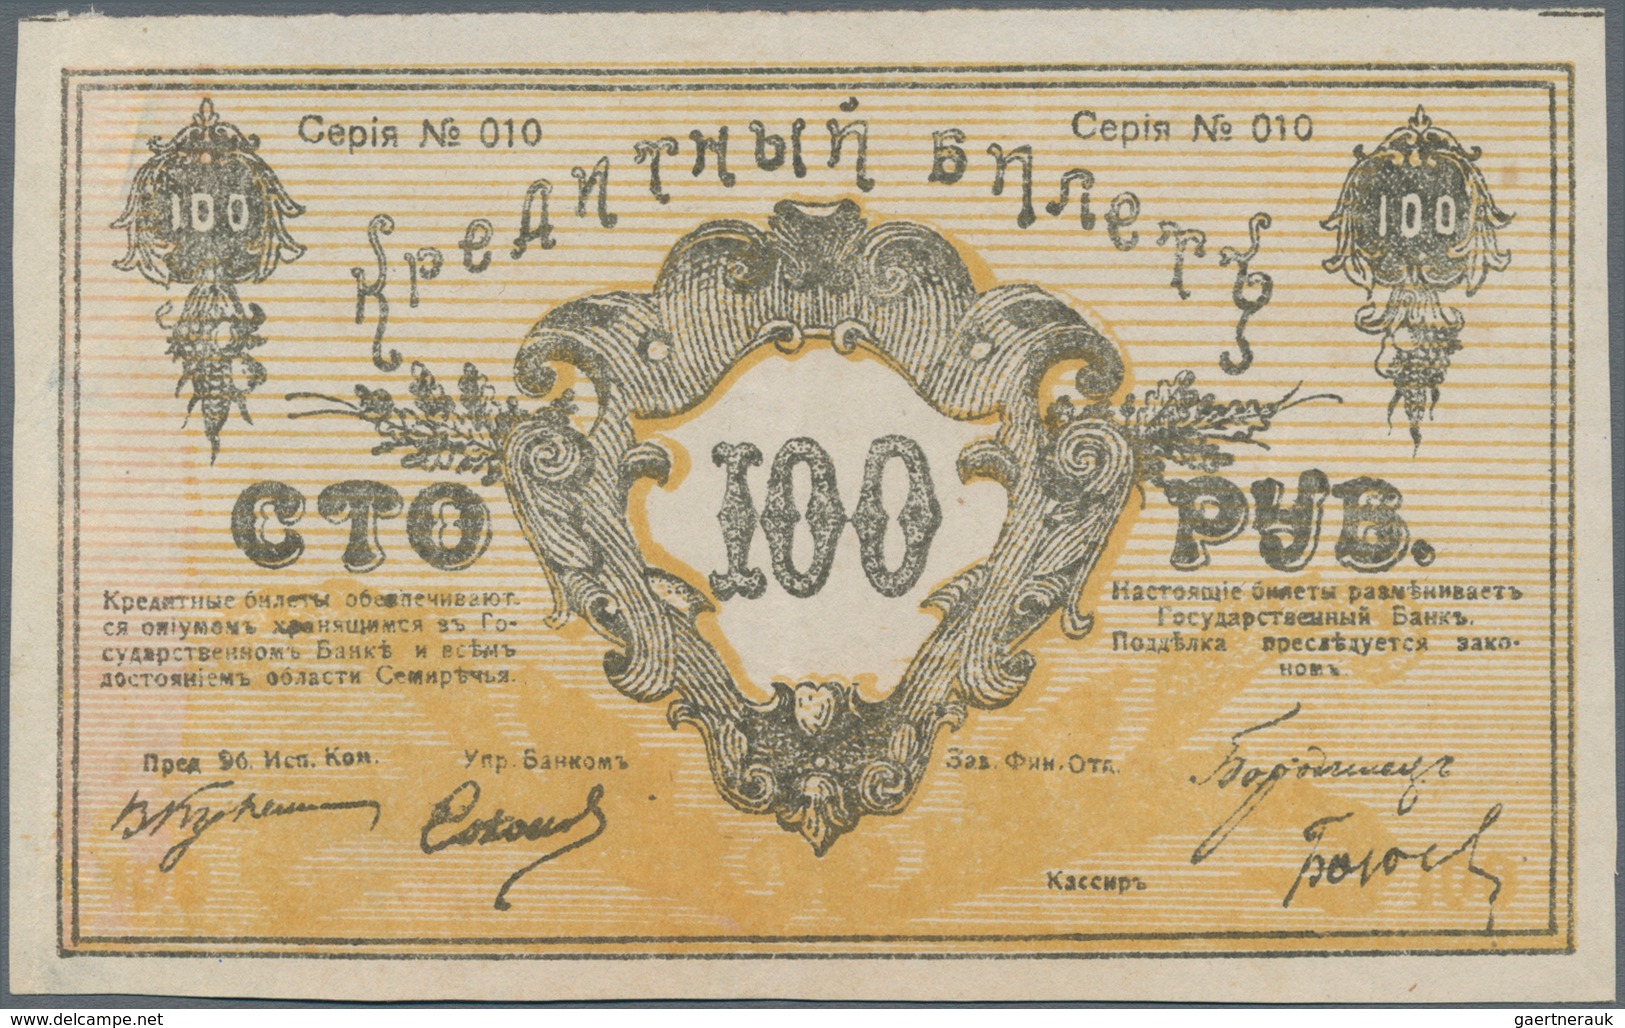 Russia / Russland: Central Asia - Semireche Region 100 Rubles 1919, Front Proof, P.S1131p (R. 20615a - Russland